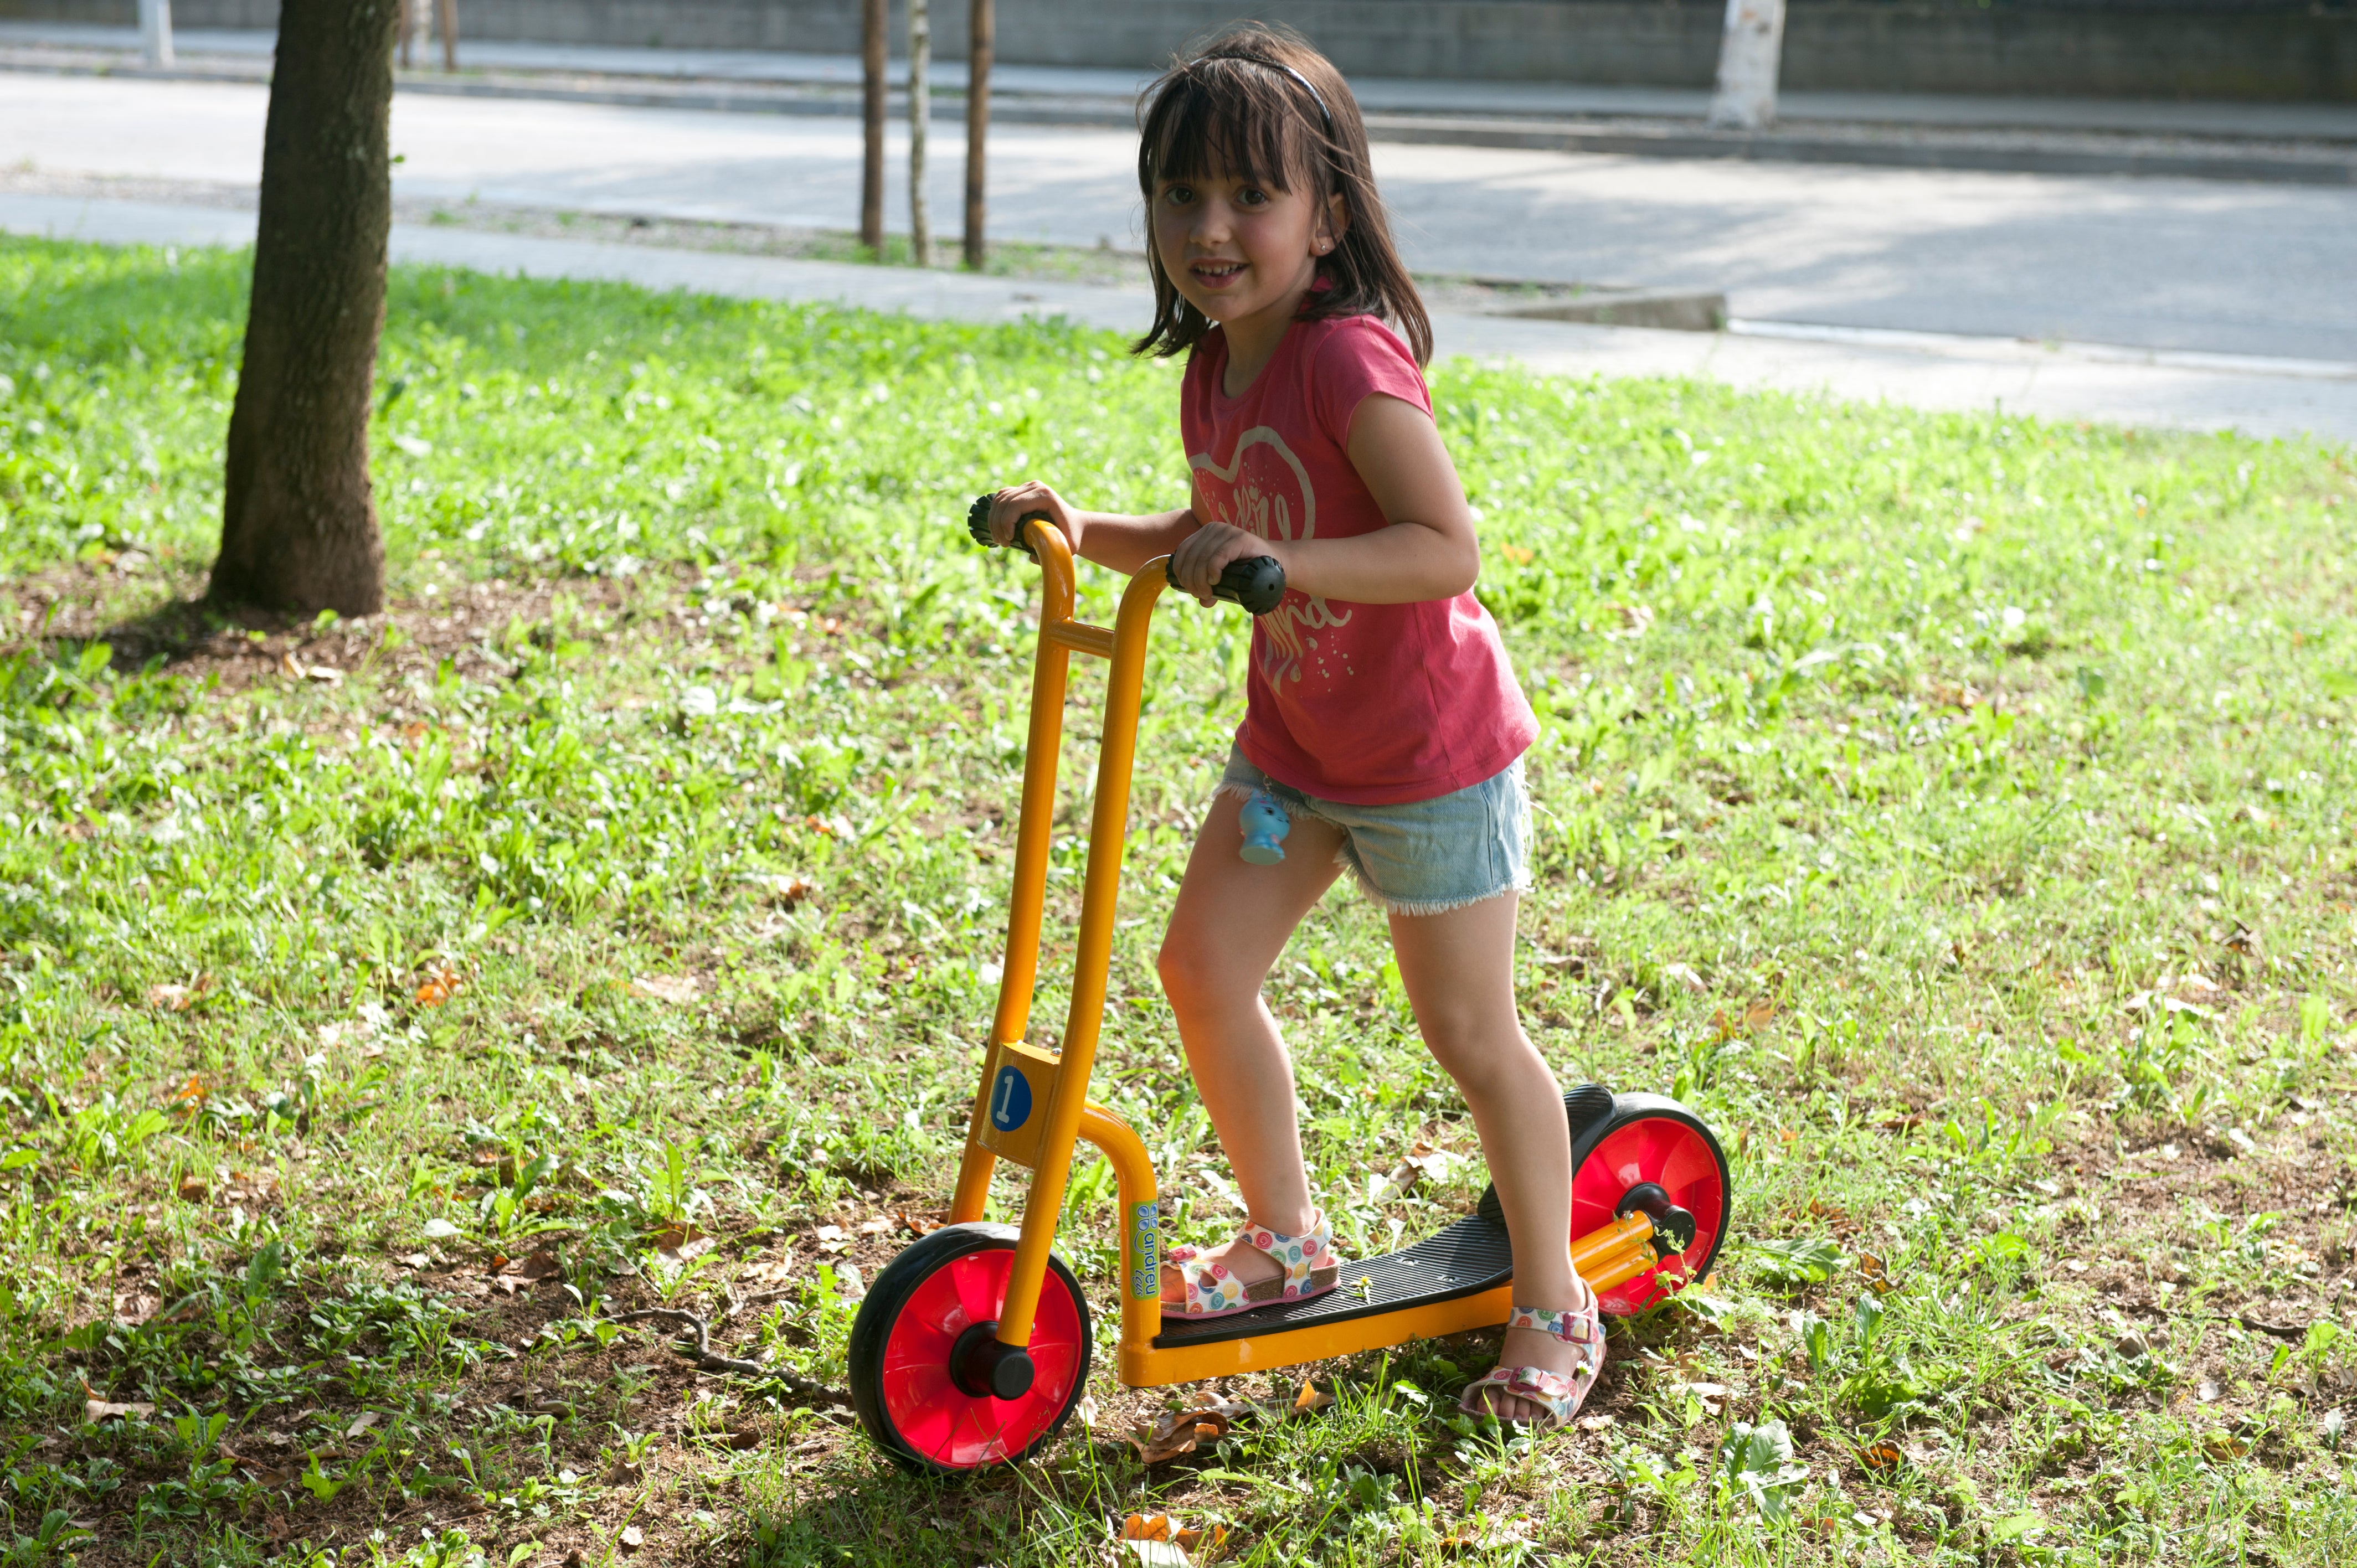 Infant heavy duty scooter 3-7 years - Outdoor toy.